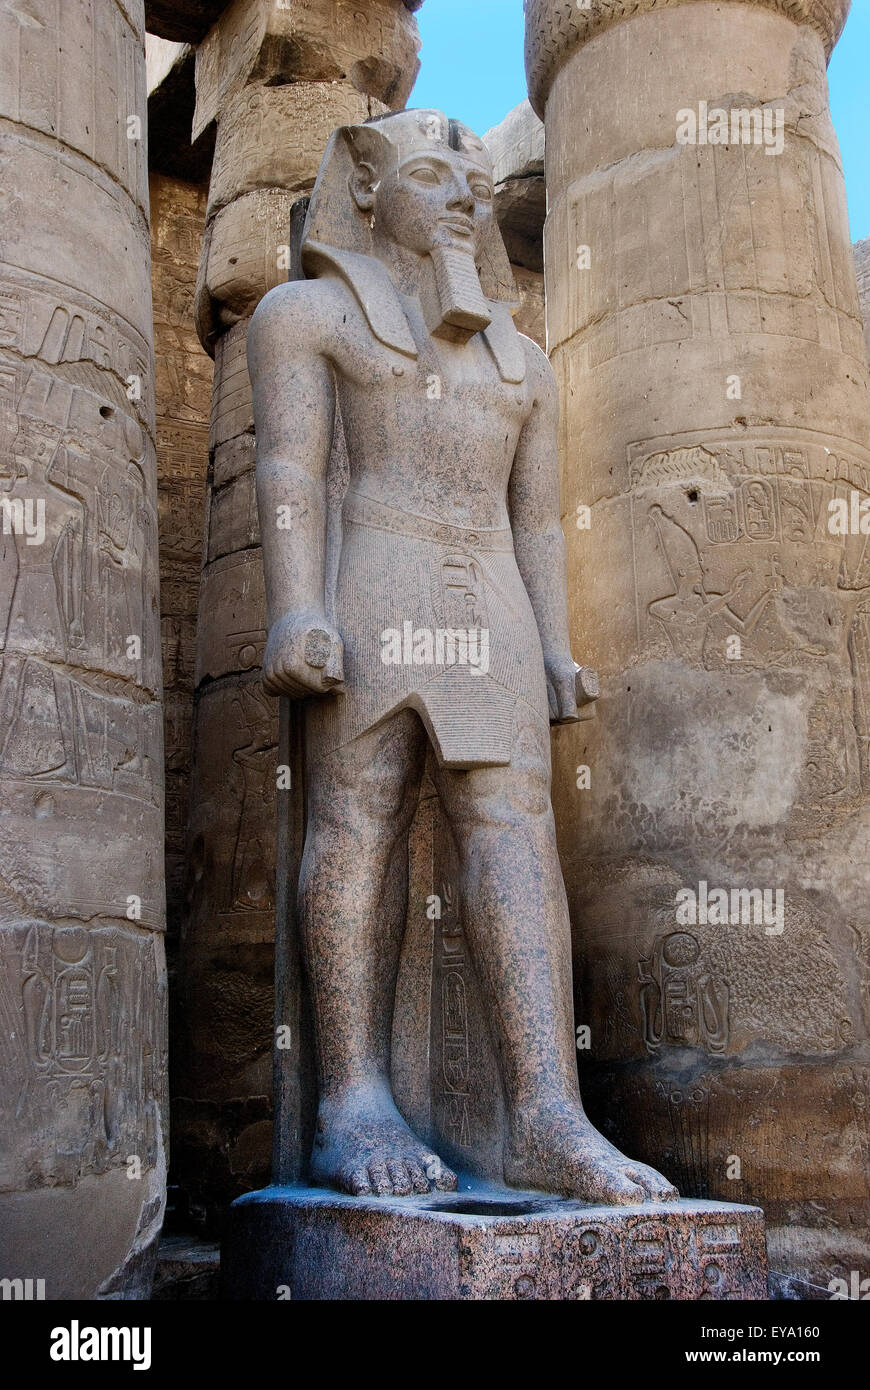 Luxor, Egypt. Temple of Luxor (Ipet resyt):  a big statue of the king Ramses II the Great (1303-1212) Stock Photo